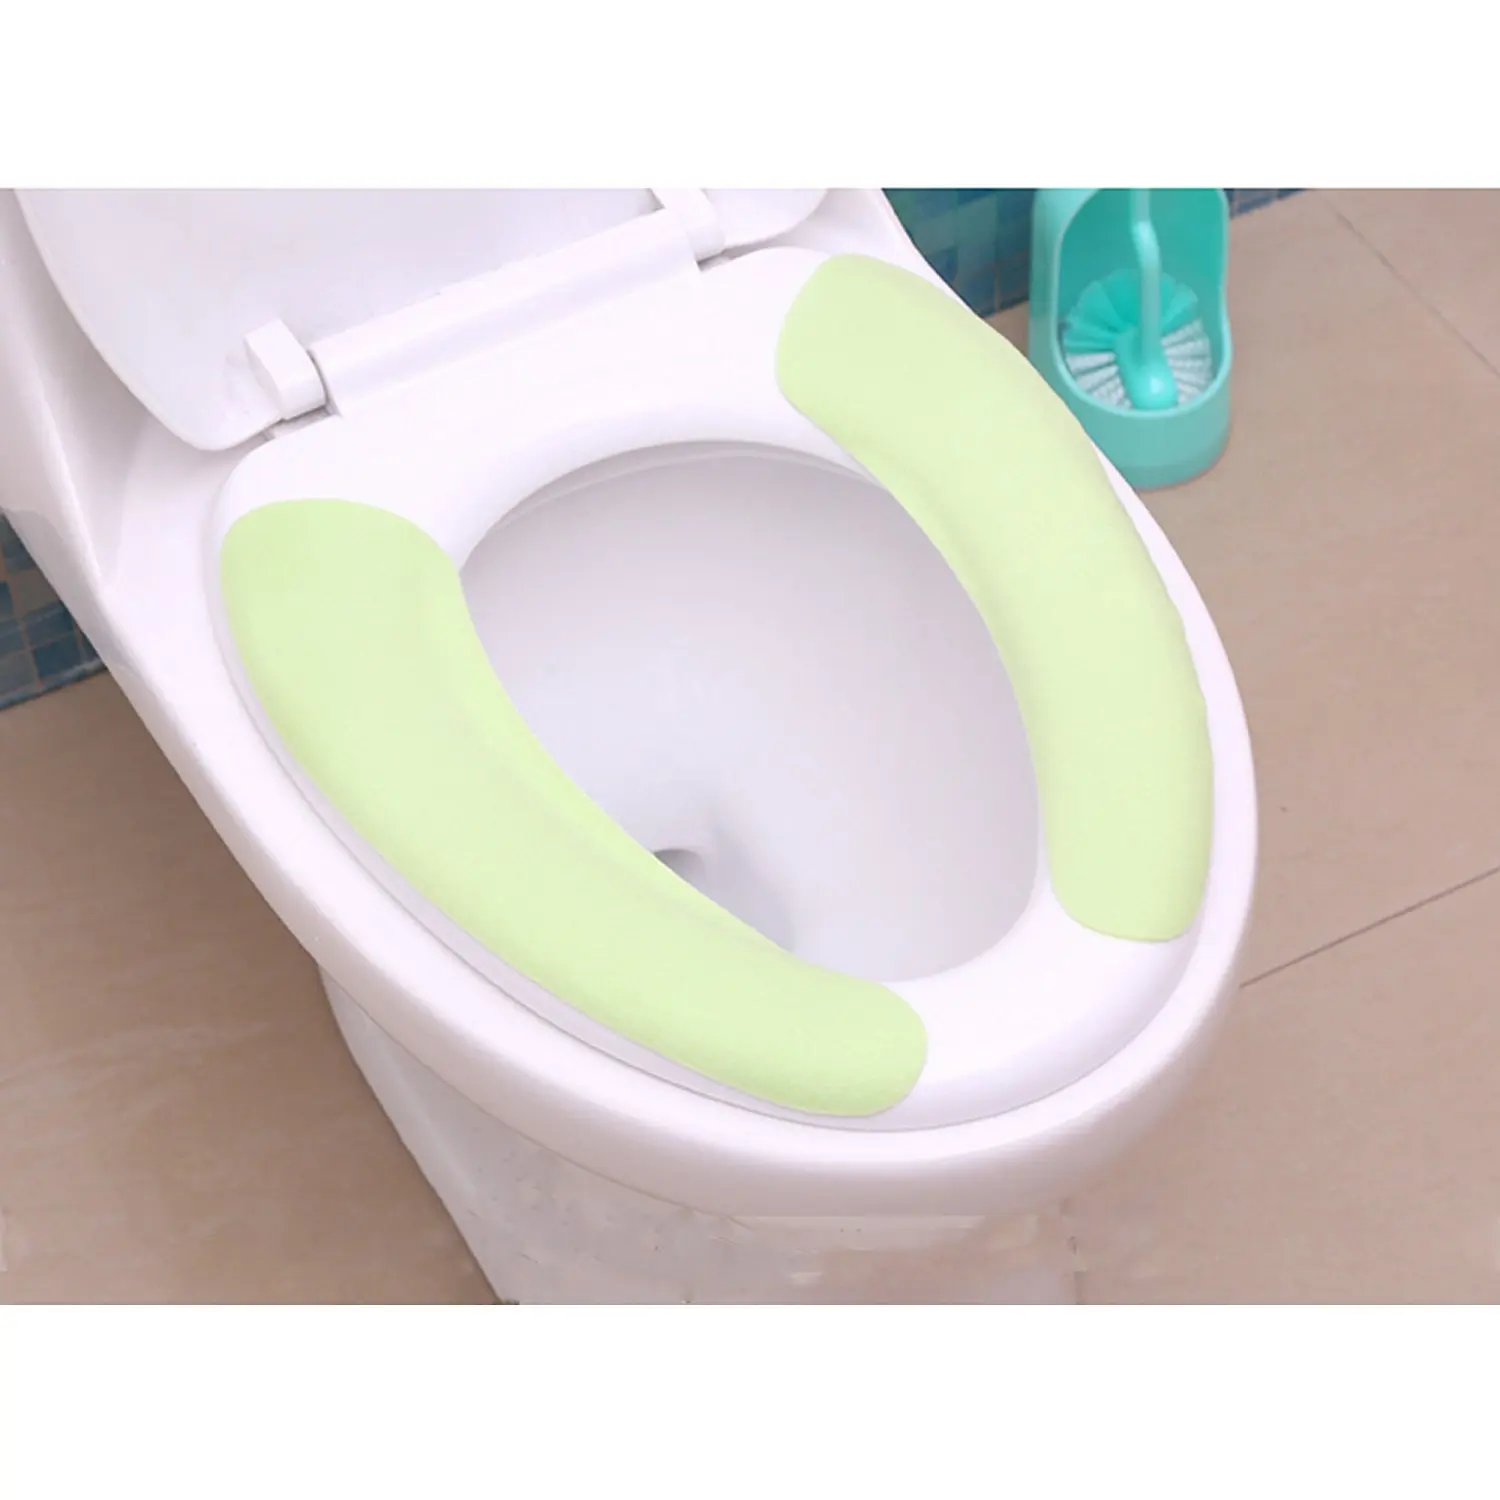 Cheap Lime Green Toilet Seat, find Lime Green Toilet Seat deals on line